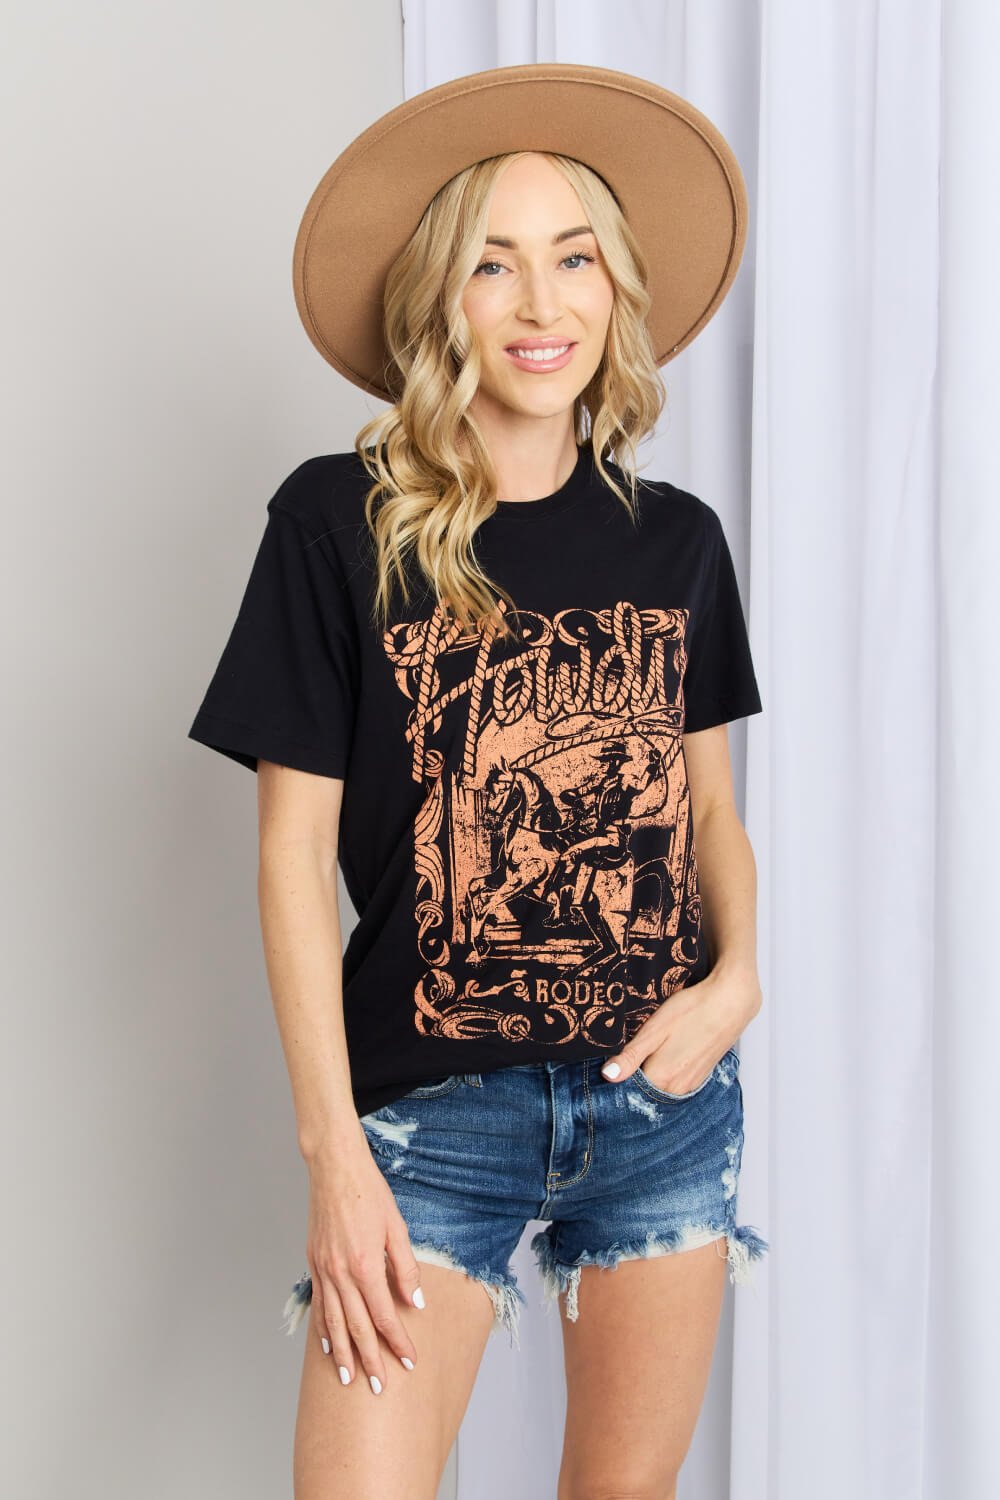 Howdy Rodeo Graphic Crew Neck Cotton Tee in BlackTeemineB